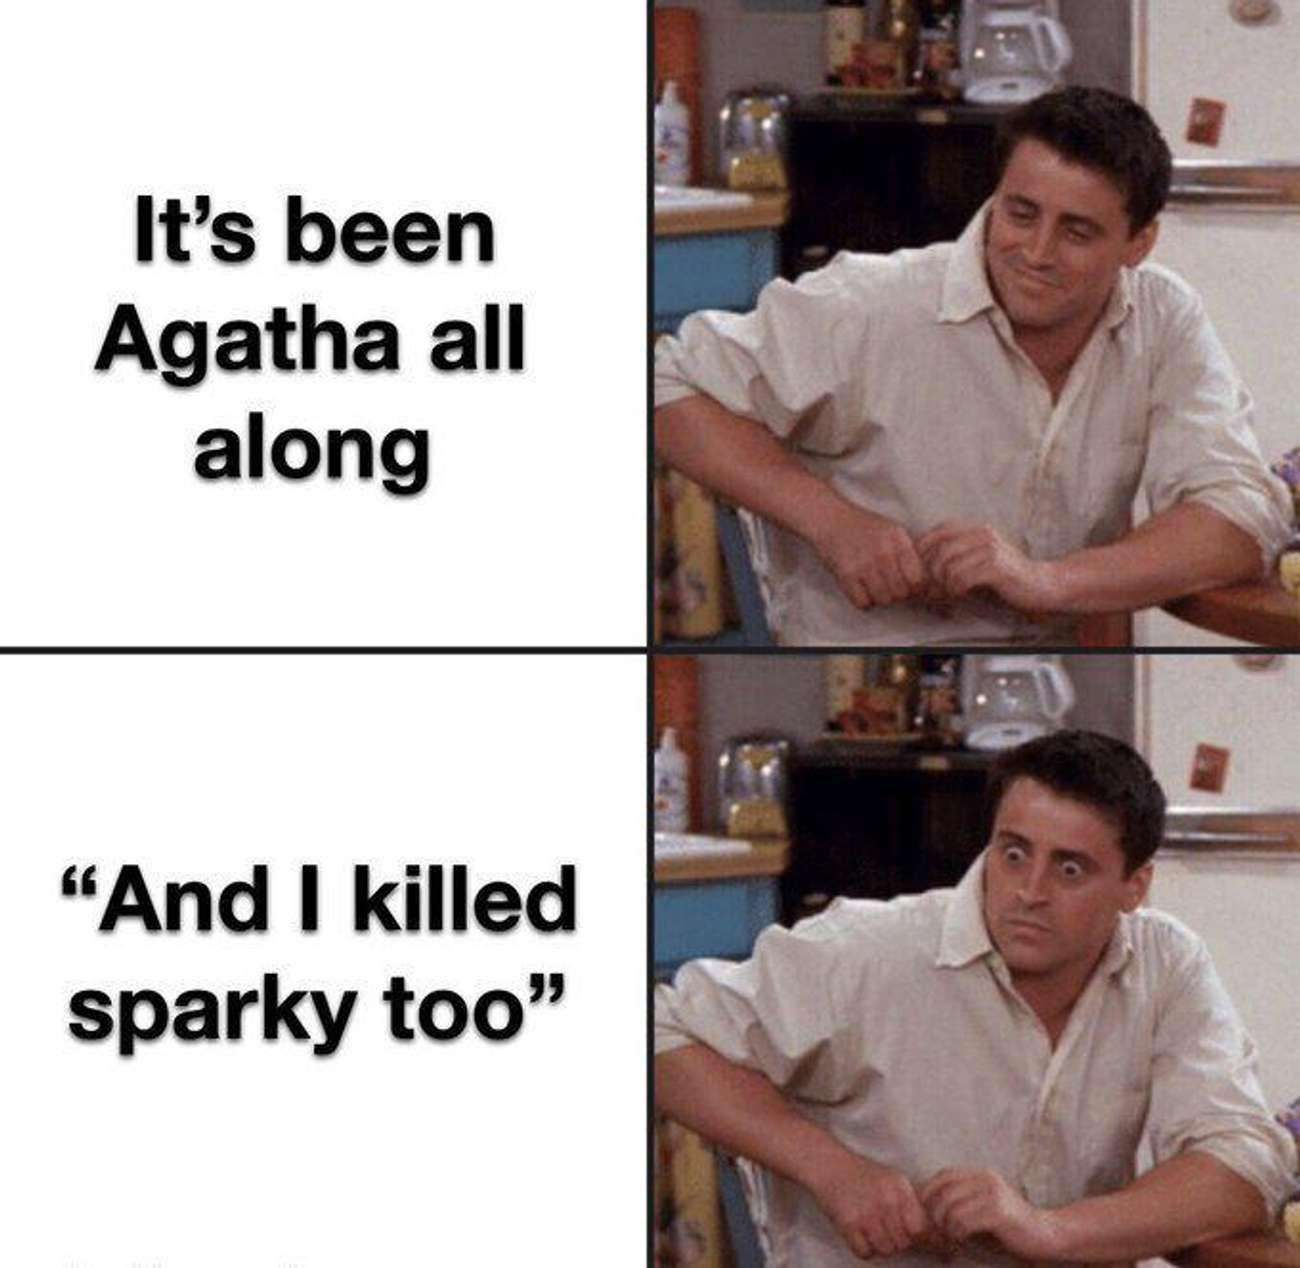 Agatha Harkness Meme featuring Joey from friends